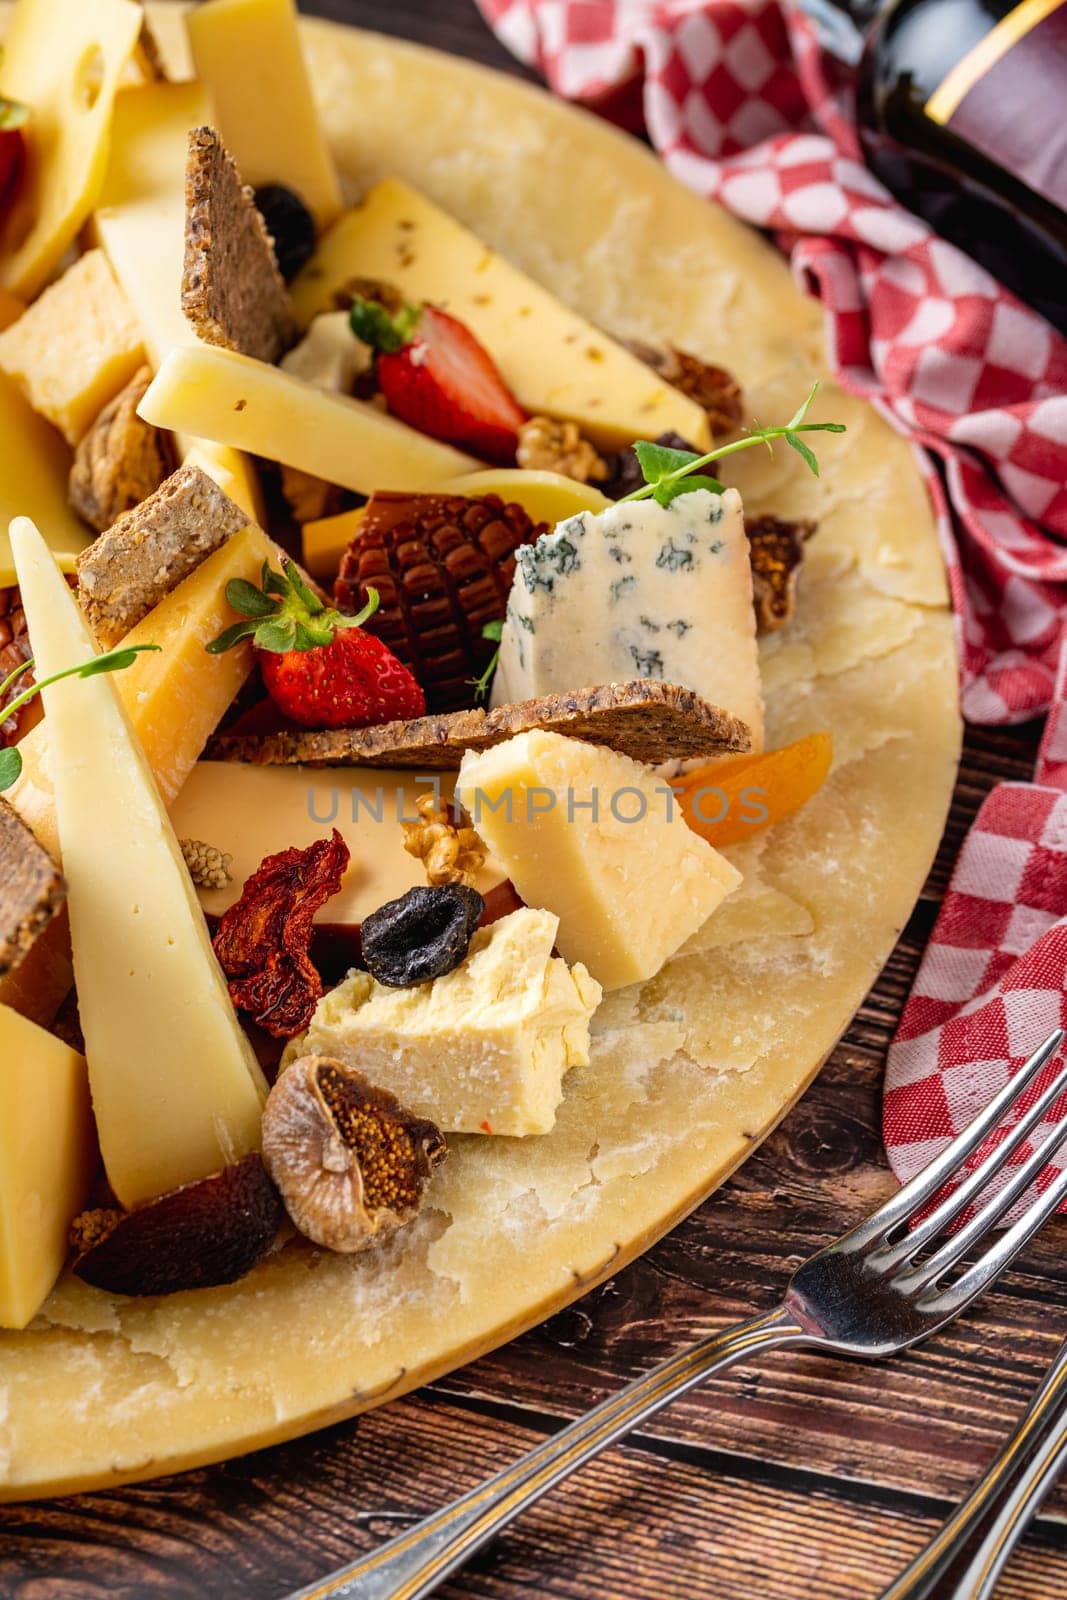 Cheese plate prepared with luxury cheeses and wine on wooden table